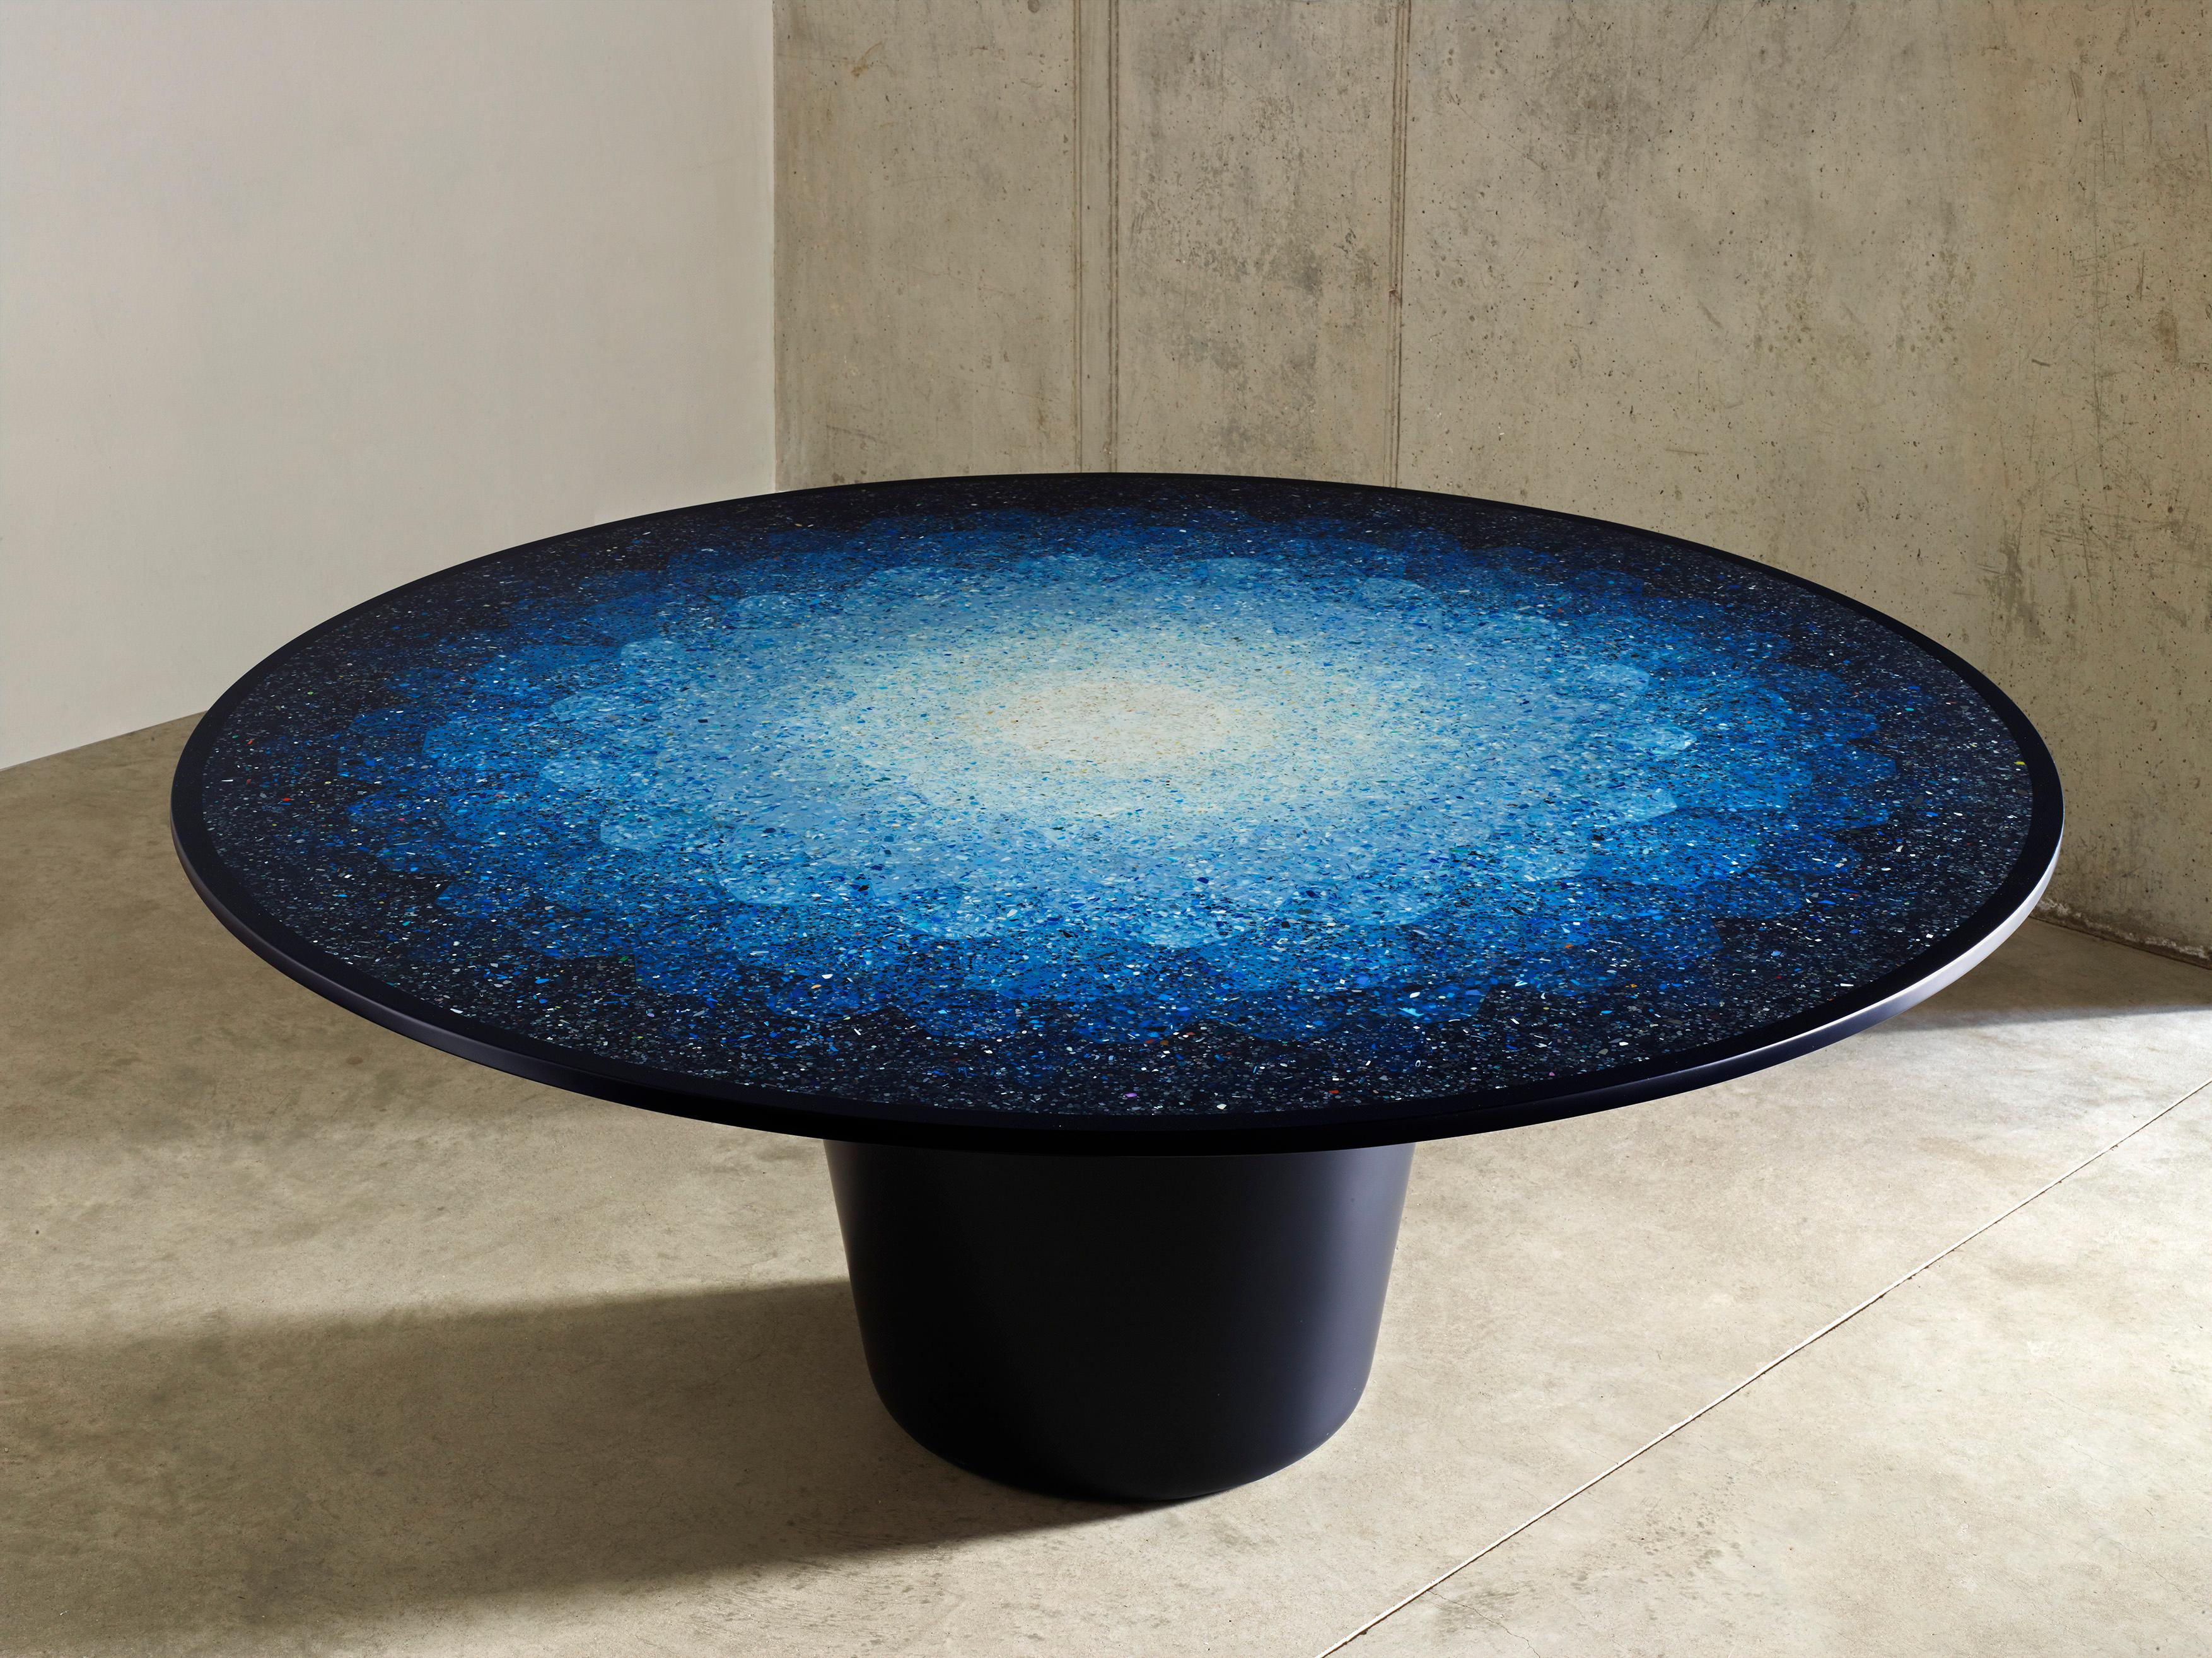 A contemporary rendition of a 19th century specimen table, Gyro substitutes examples of precious marbles, timbers and ivory with ocean terrazzo, an innovative composite material developed by Brodie Neill using fragments of ocean plastic. In striking